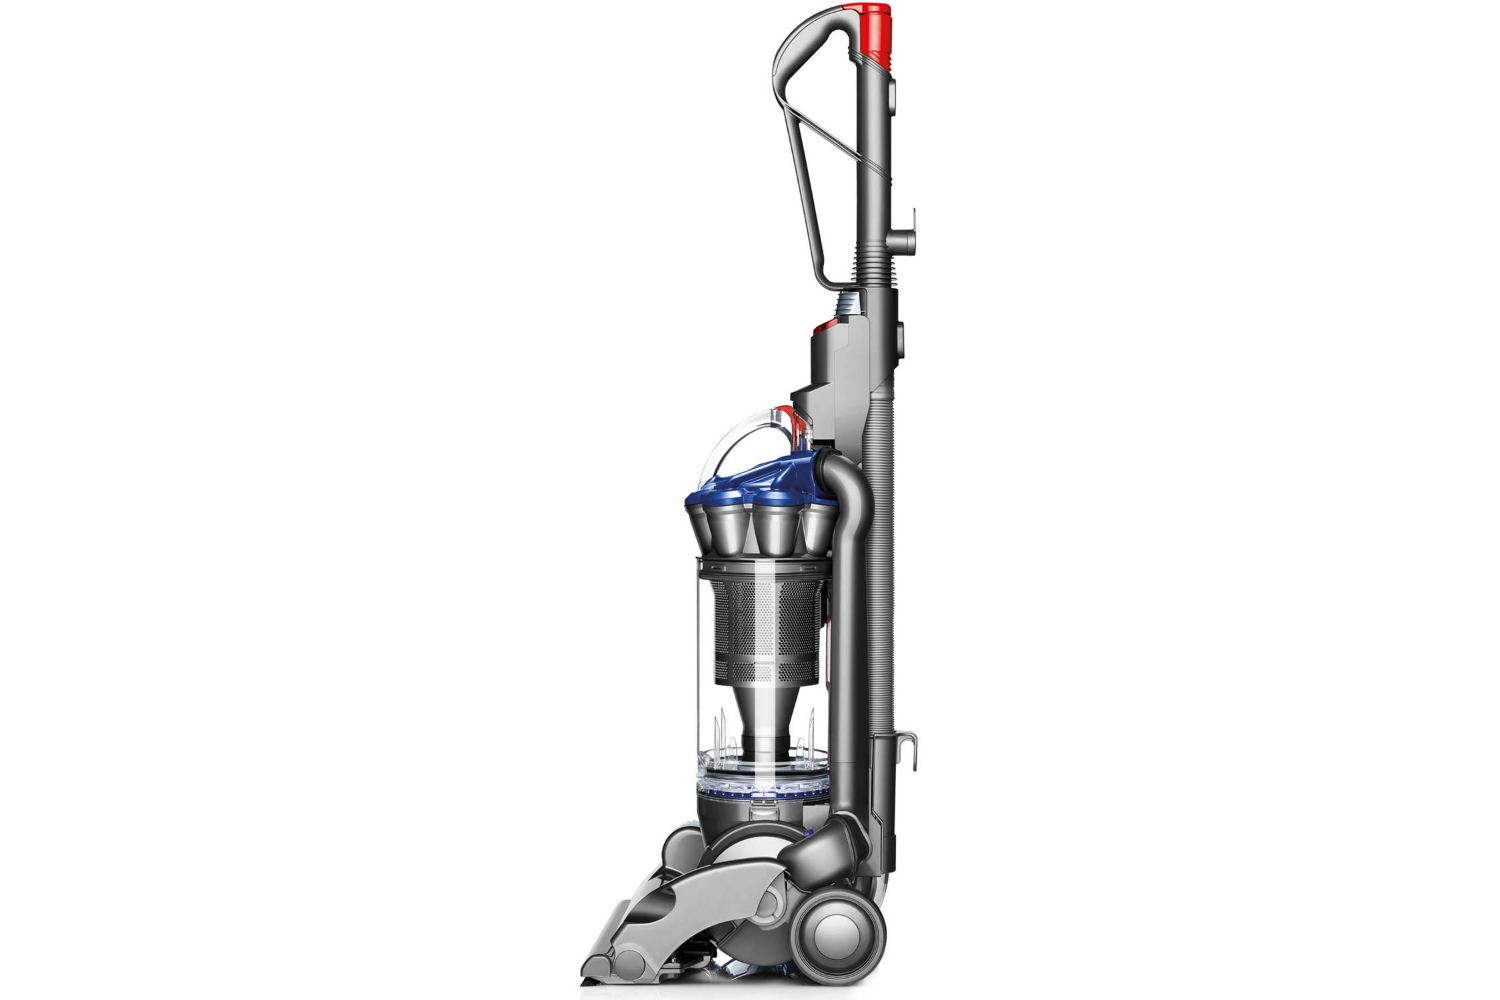 dyson and shark vacuum cleaners on sale for under 200 at walmart dc33 multifloor bagless upright 2